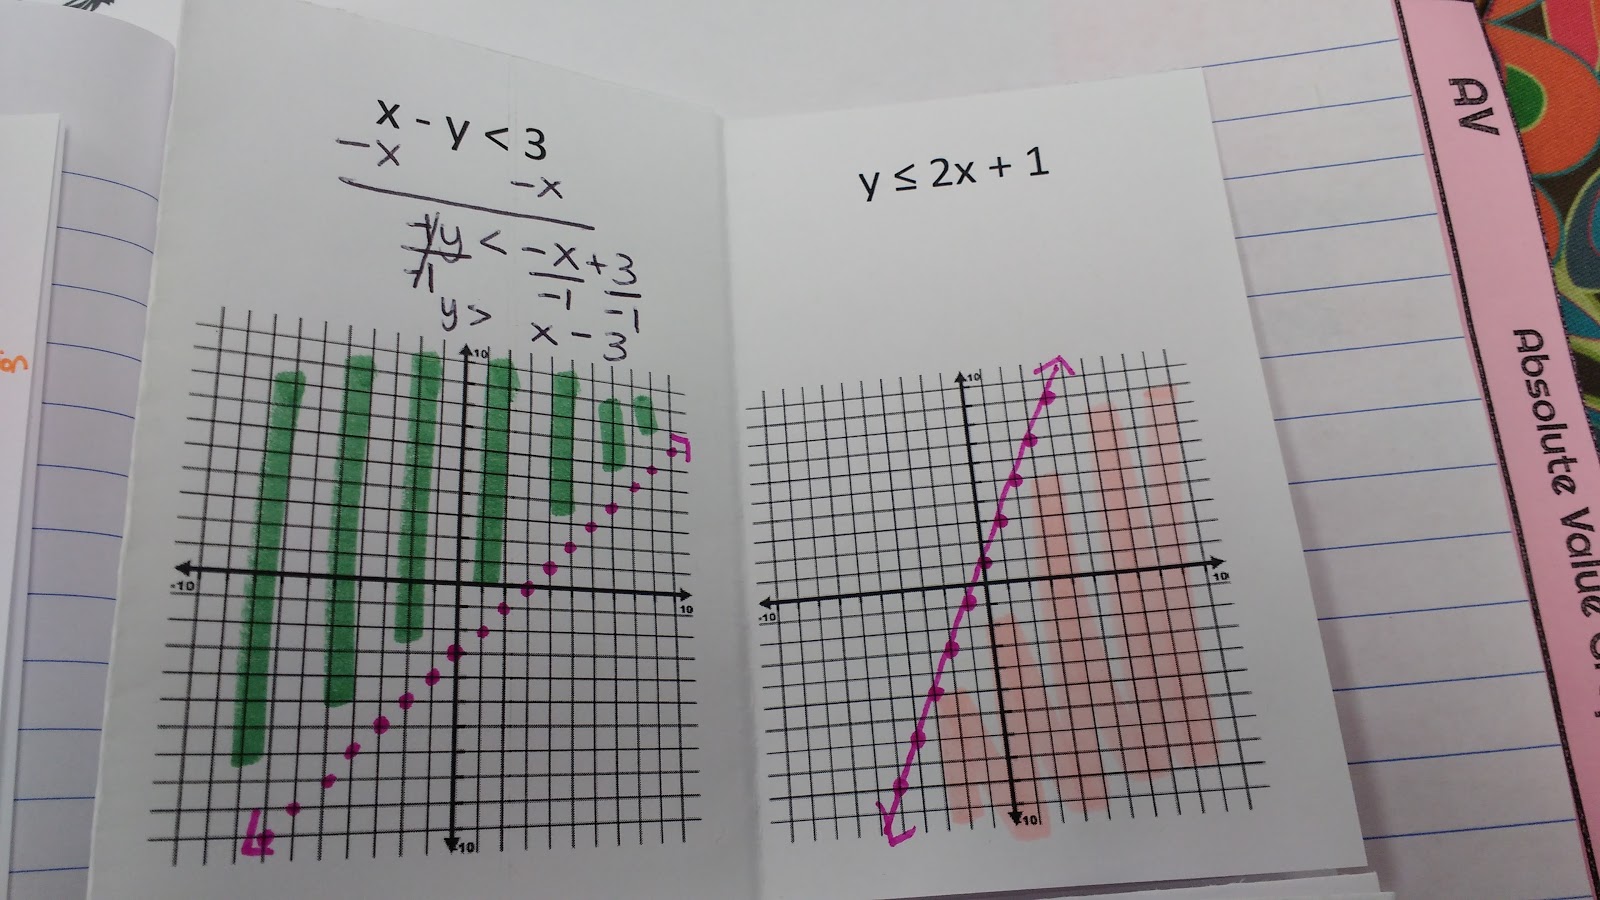 graphing linear inequalities practice book notes in interactive notebook. 